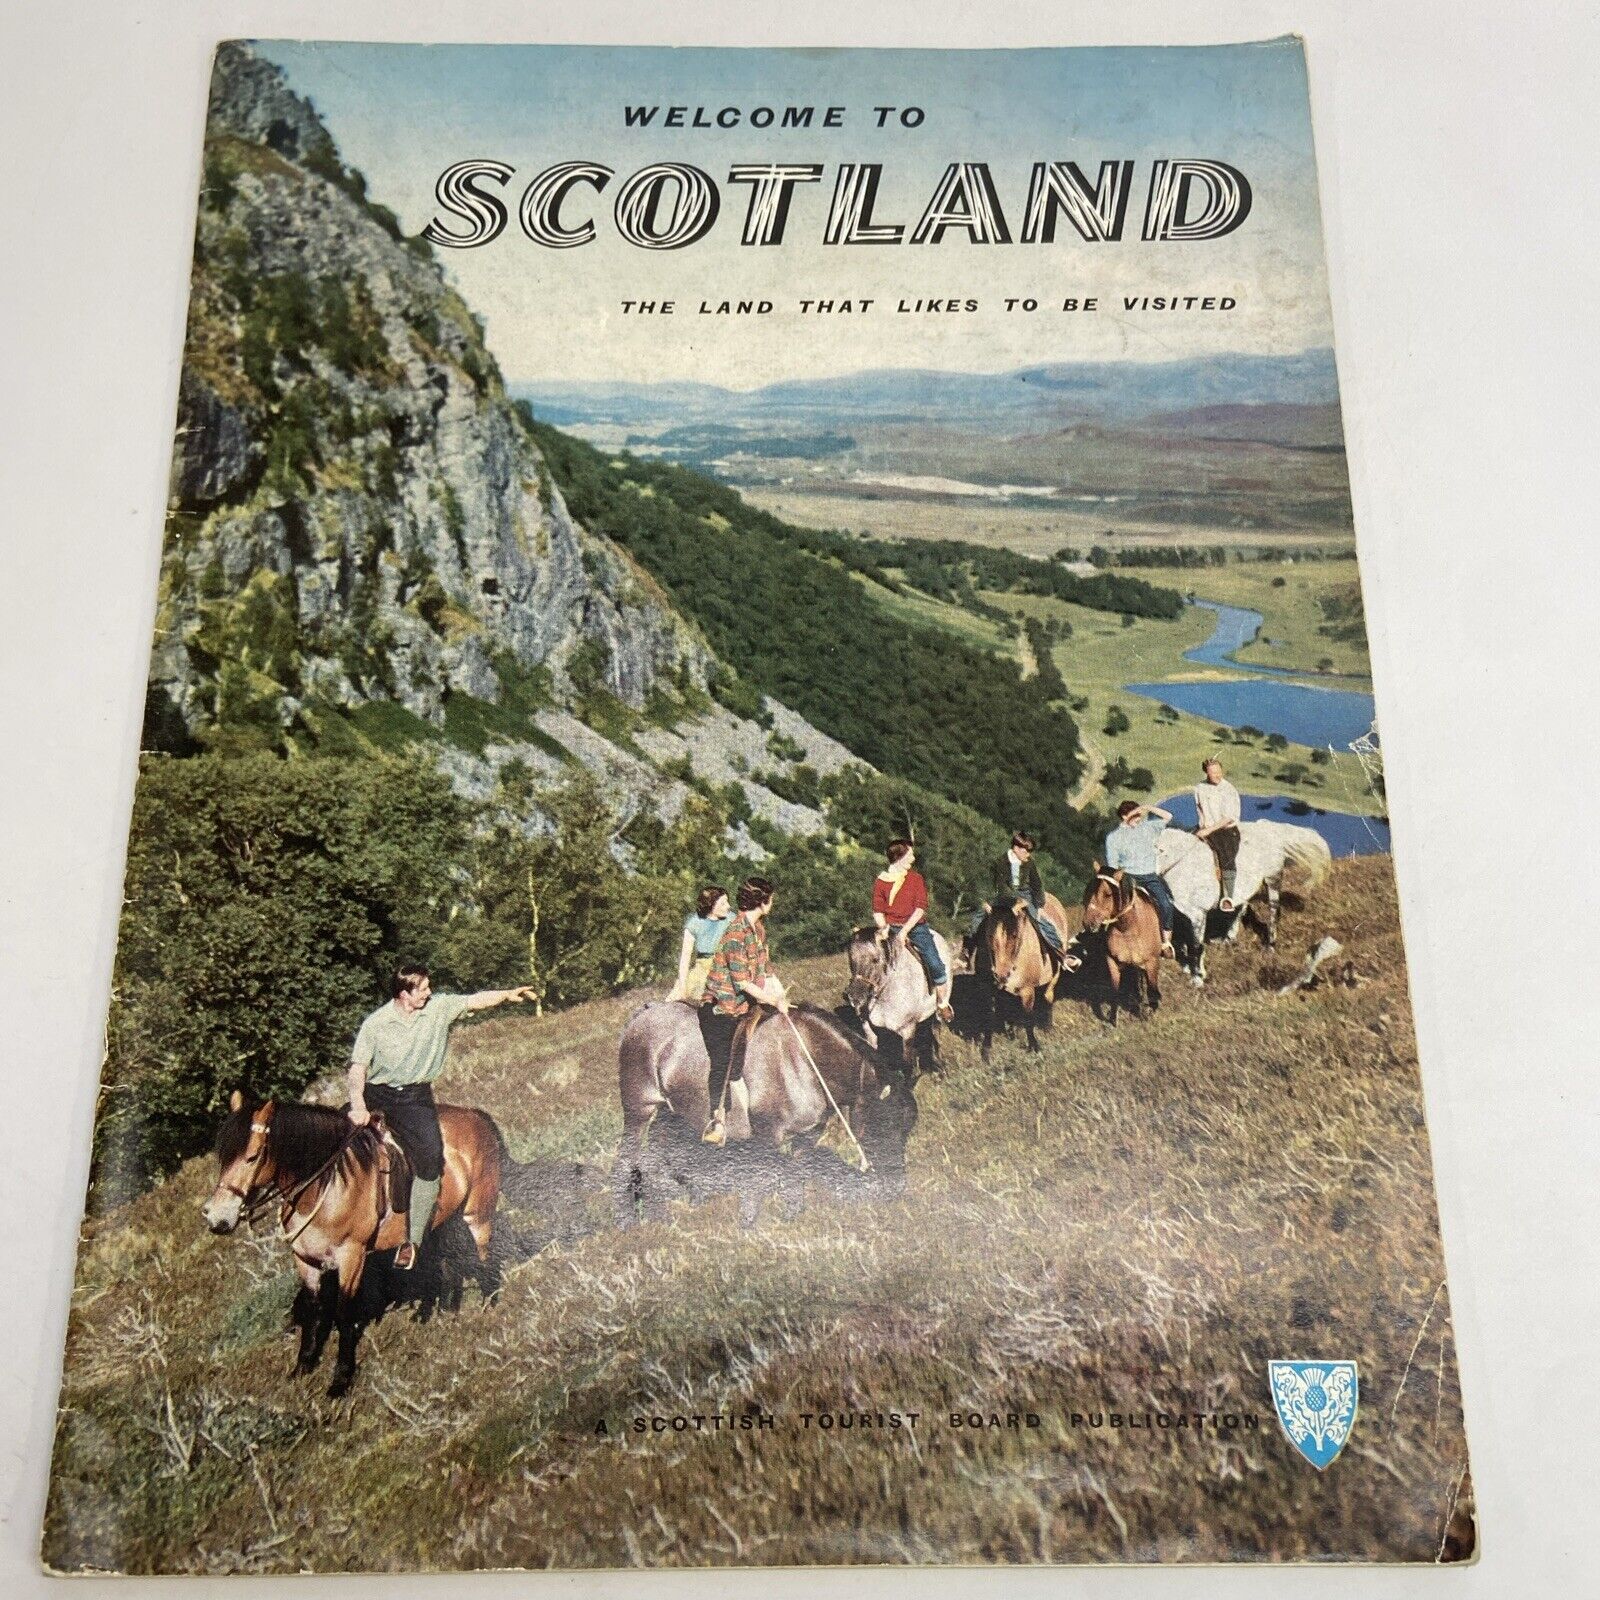 1957 Welcome To Scotland Tourist Board Publication The Land That Likes To Be Vis